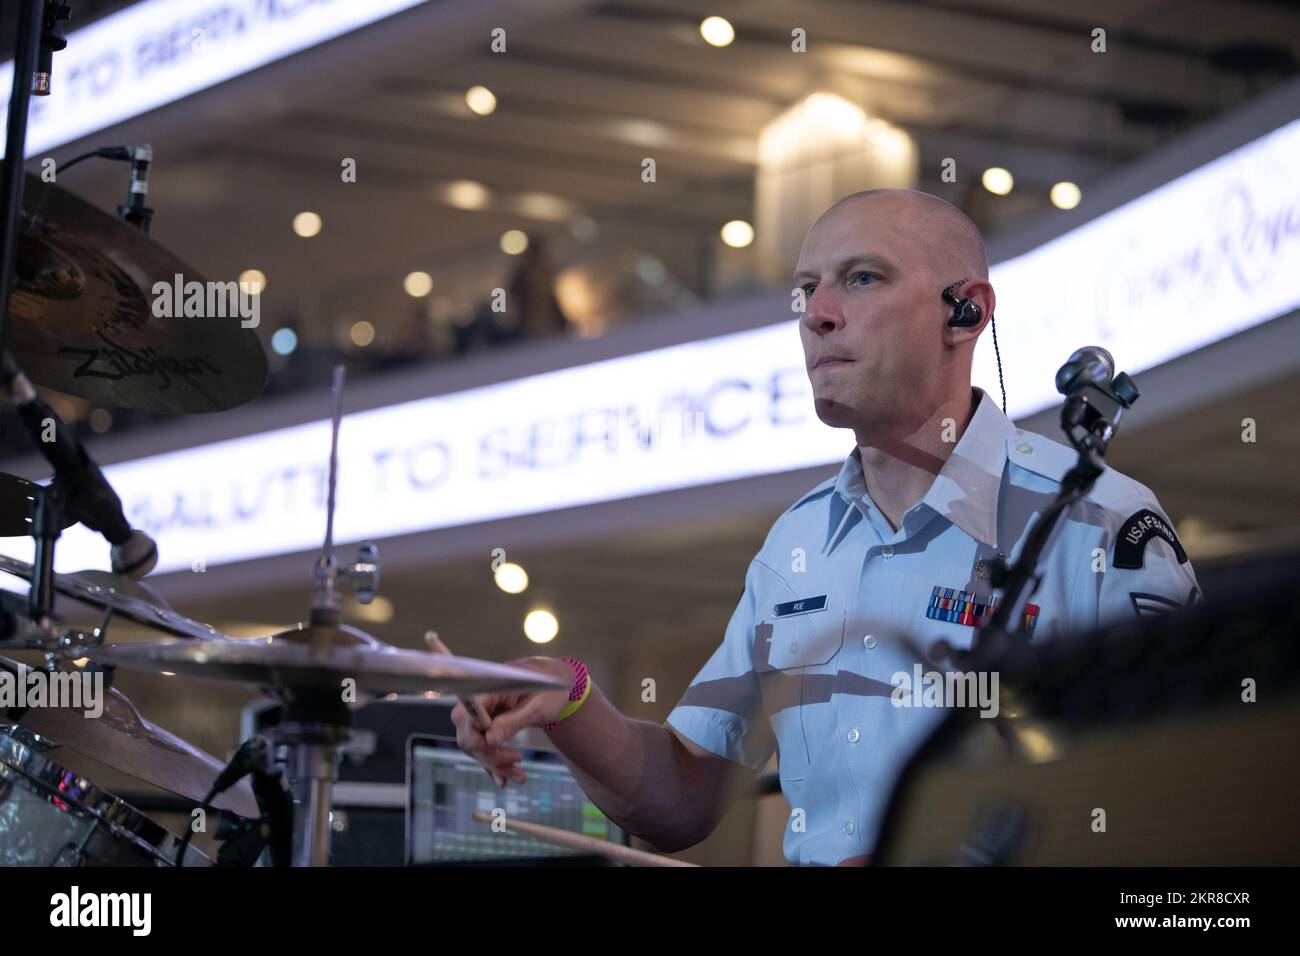 U.S. Air Force Staff Sgt. Mike Roe, USAF Band of the Golden West drummer, performs during a Sacramento Kings basketball game at the Golden 1 Center, Sacramento, California, Nov. 9, 2022. The performance was part of the Kings’ “Salute to Service” night that honored Veterans Day and paid respect to all Veterans in attendance. Stock Photo